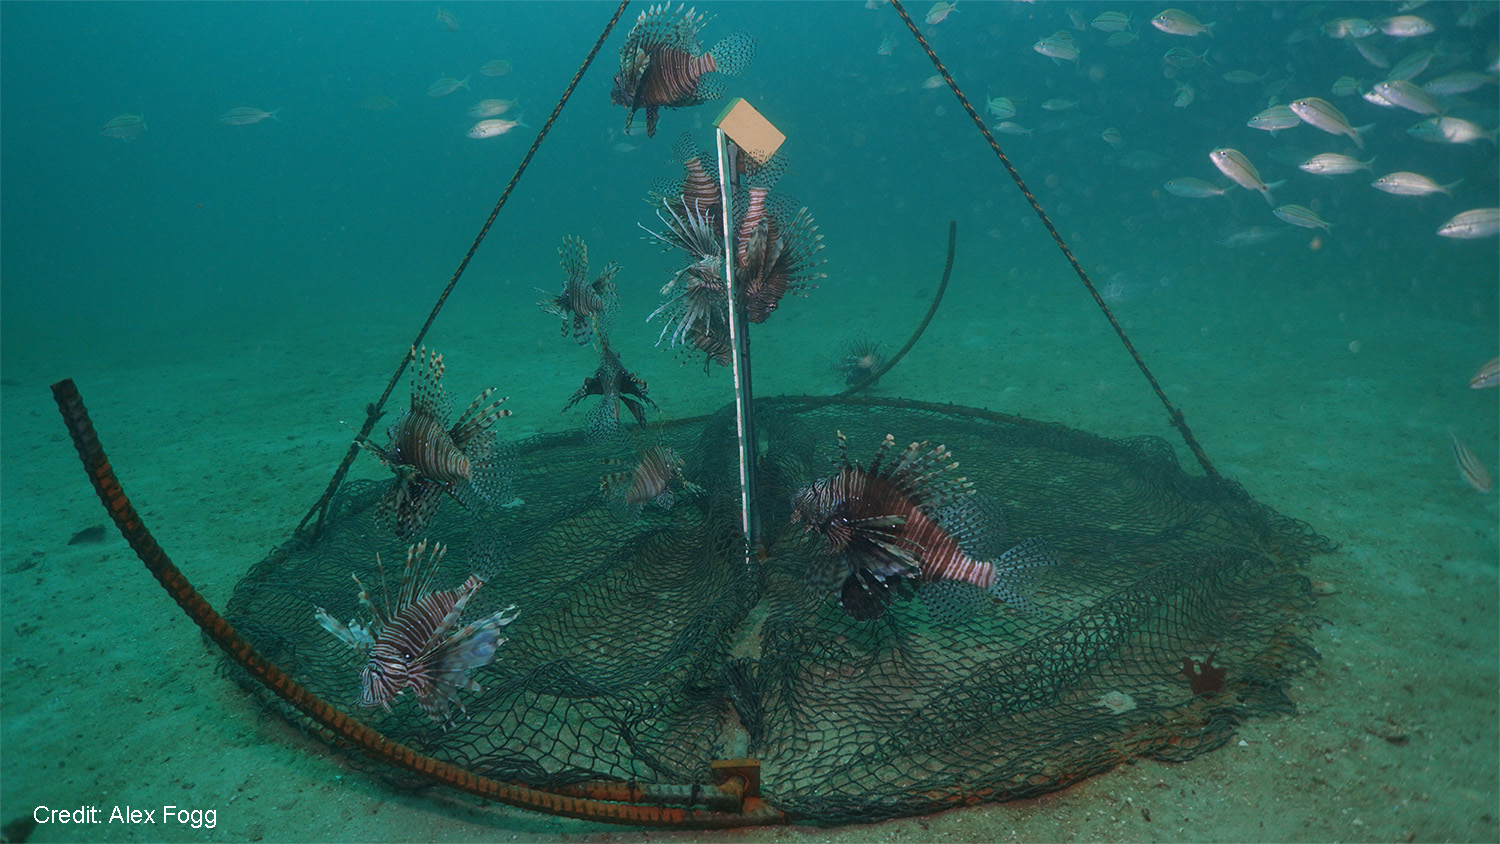 A lionfish lionfish purse trap sits on the ocean floor until it is retrieved by fishers